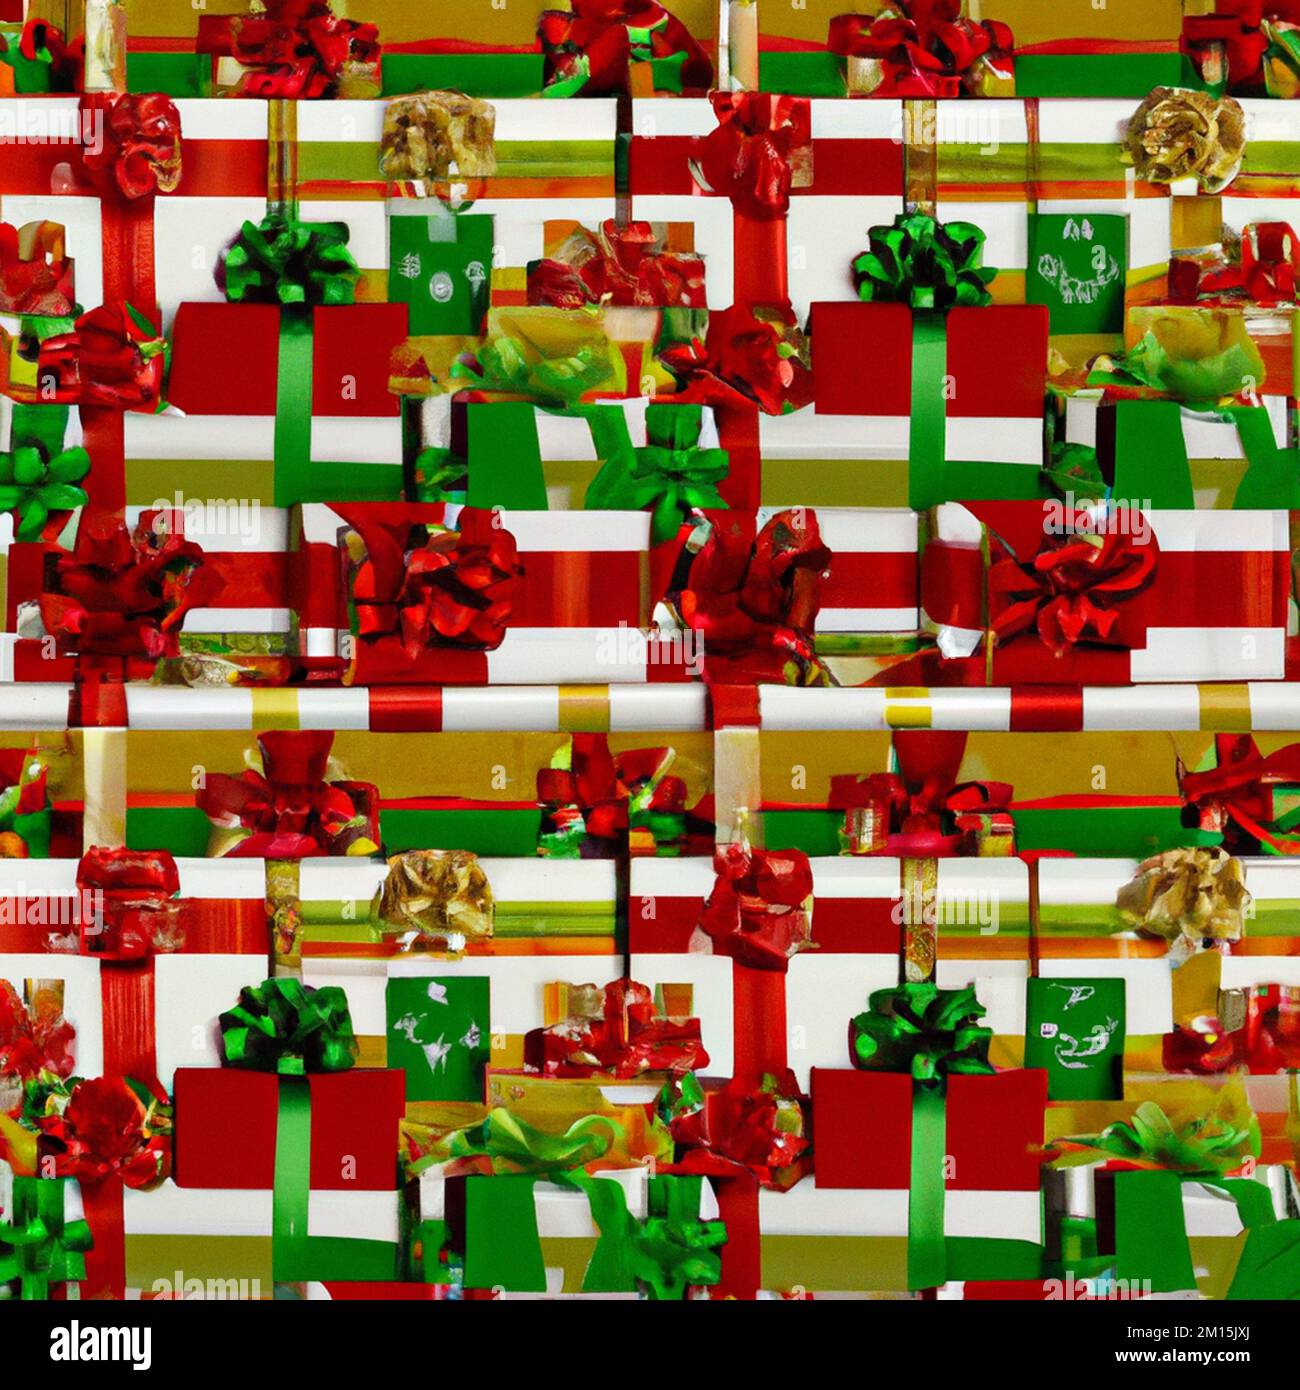 Holiday gift packages, wrapped with ribbons and bows. Background with colorful decorated gift boxes. Stock Photo